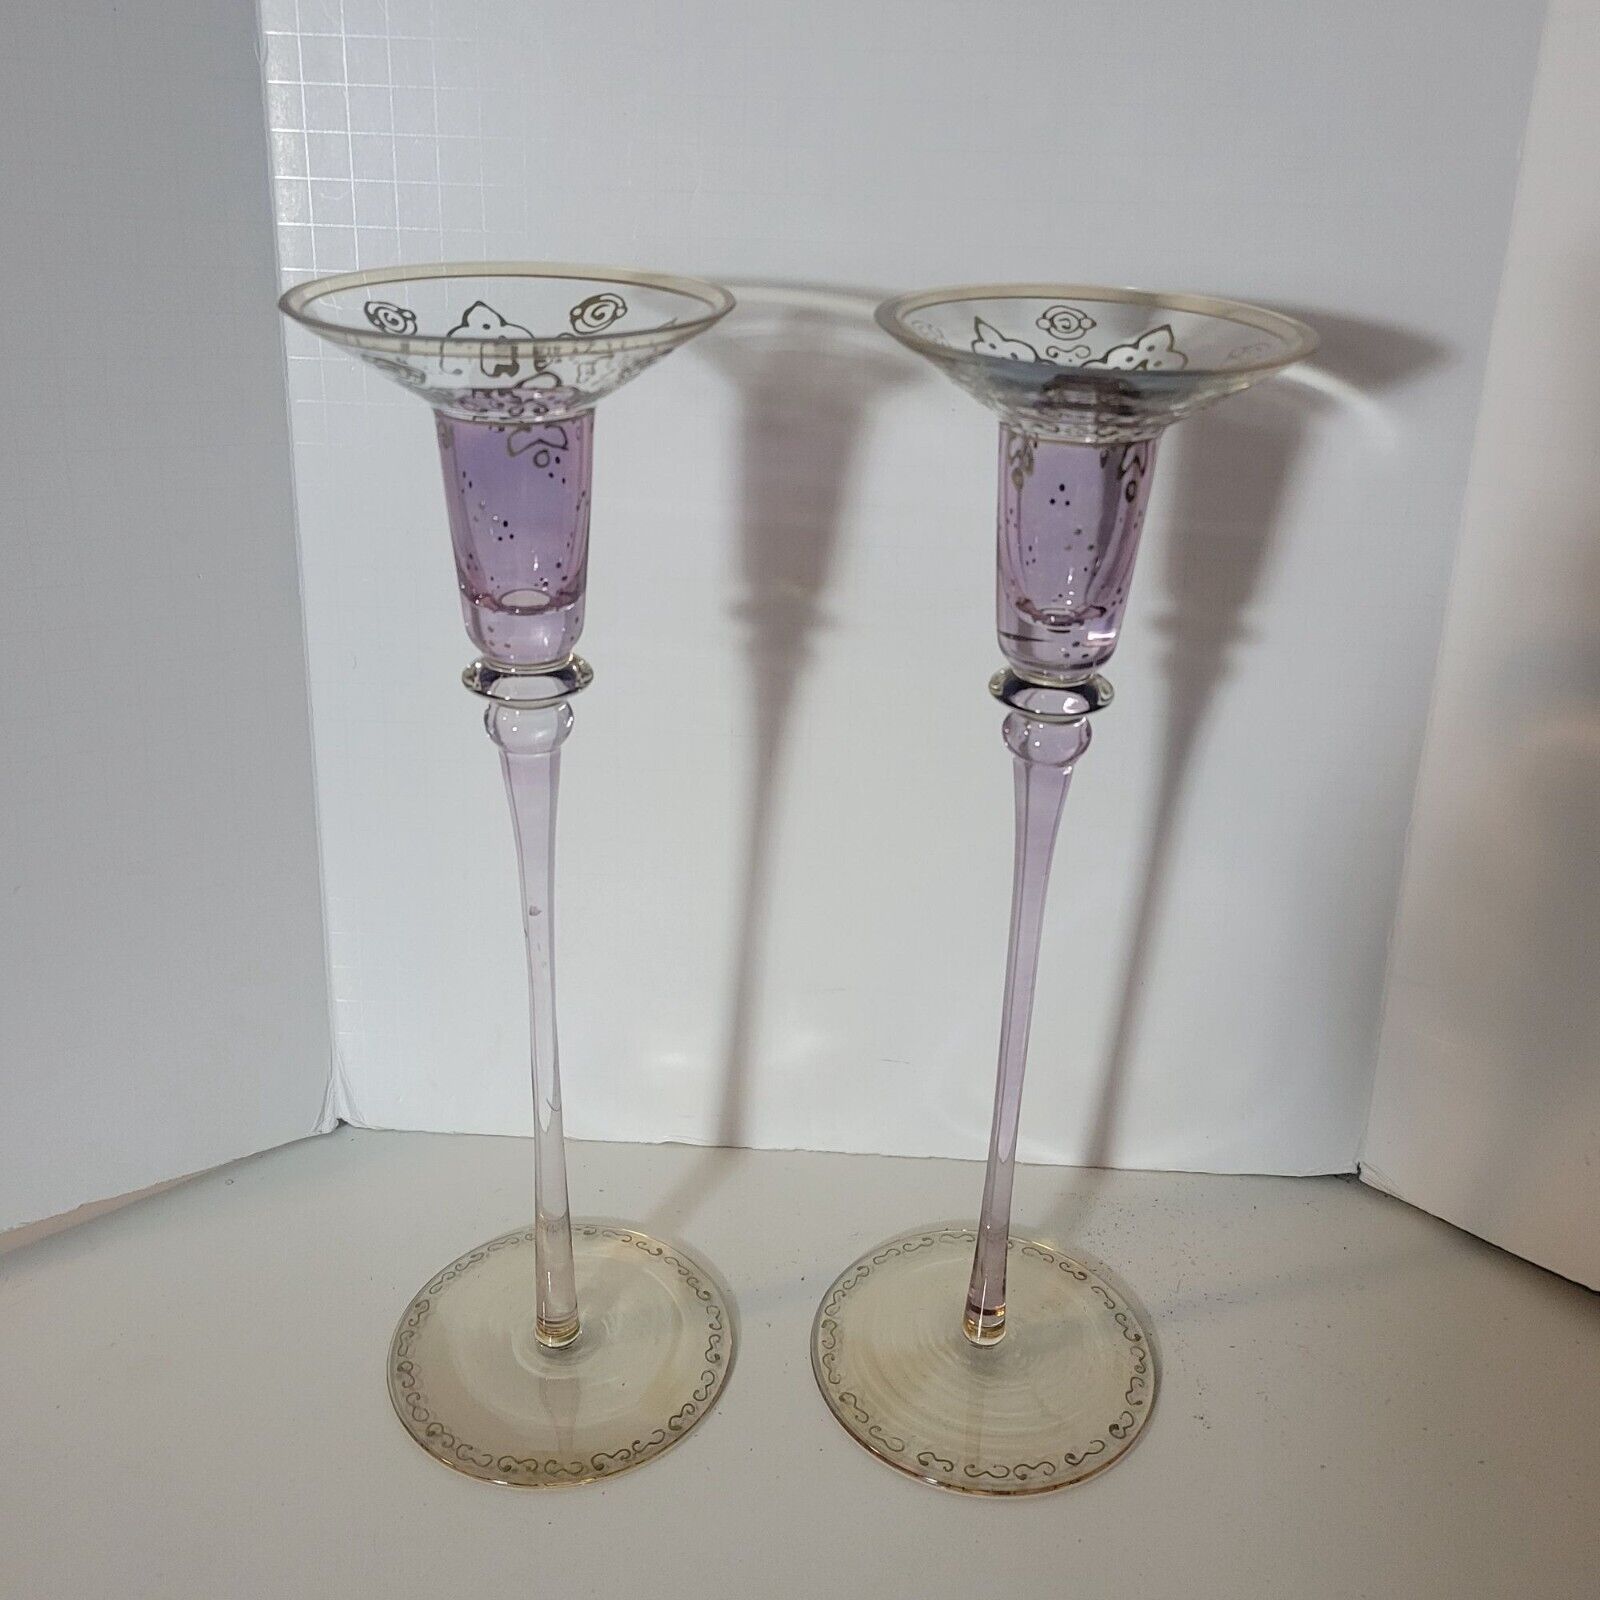 Vintage Pier 1 Exclusive Raja Hand Painted Taper Candle Holder Set NOS